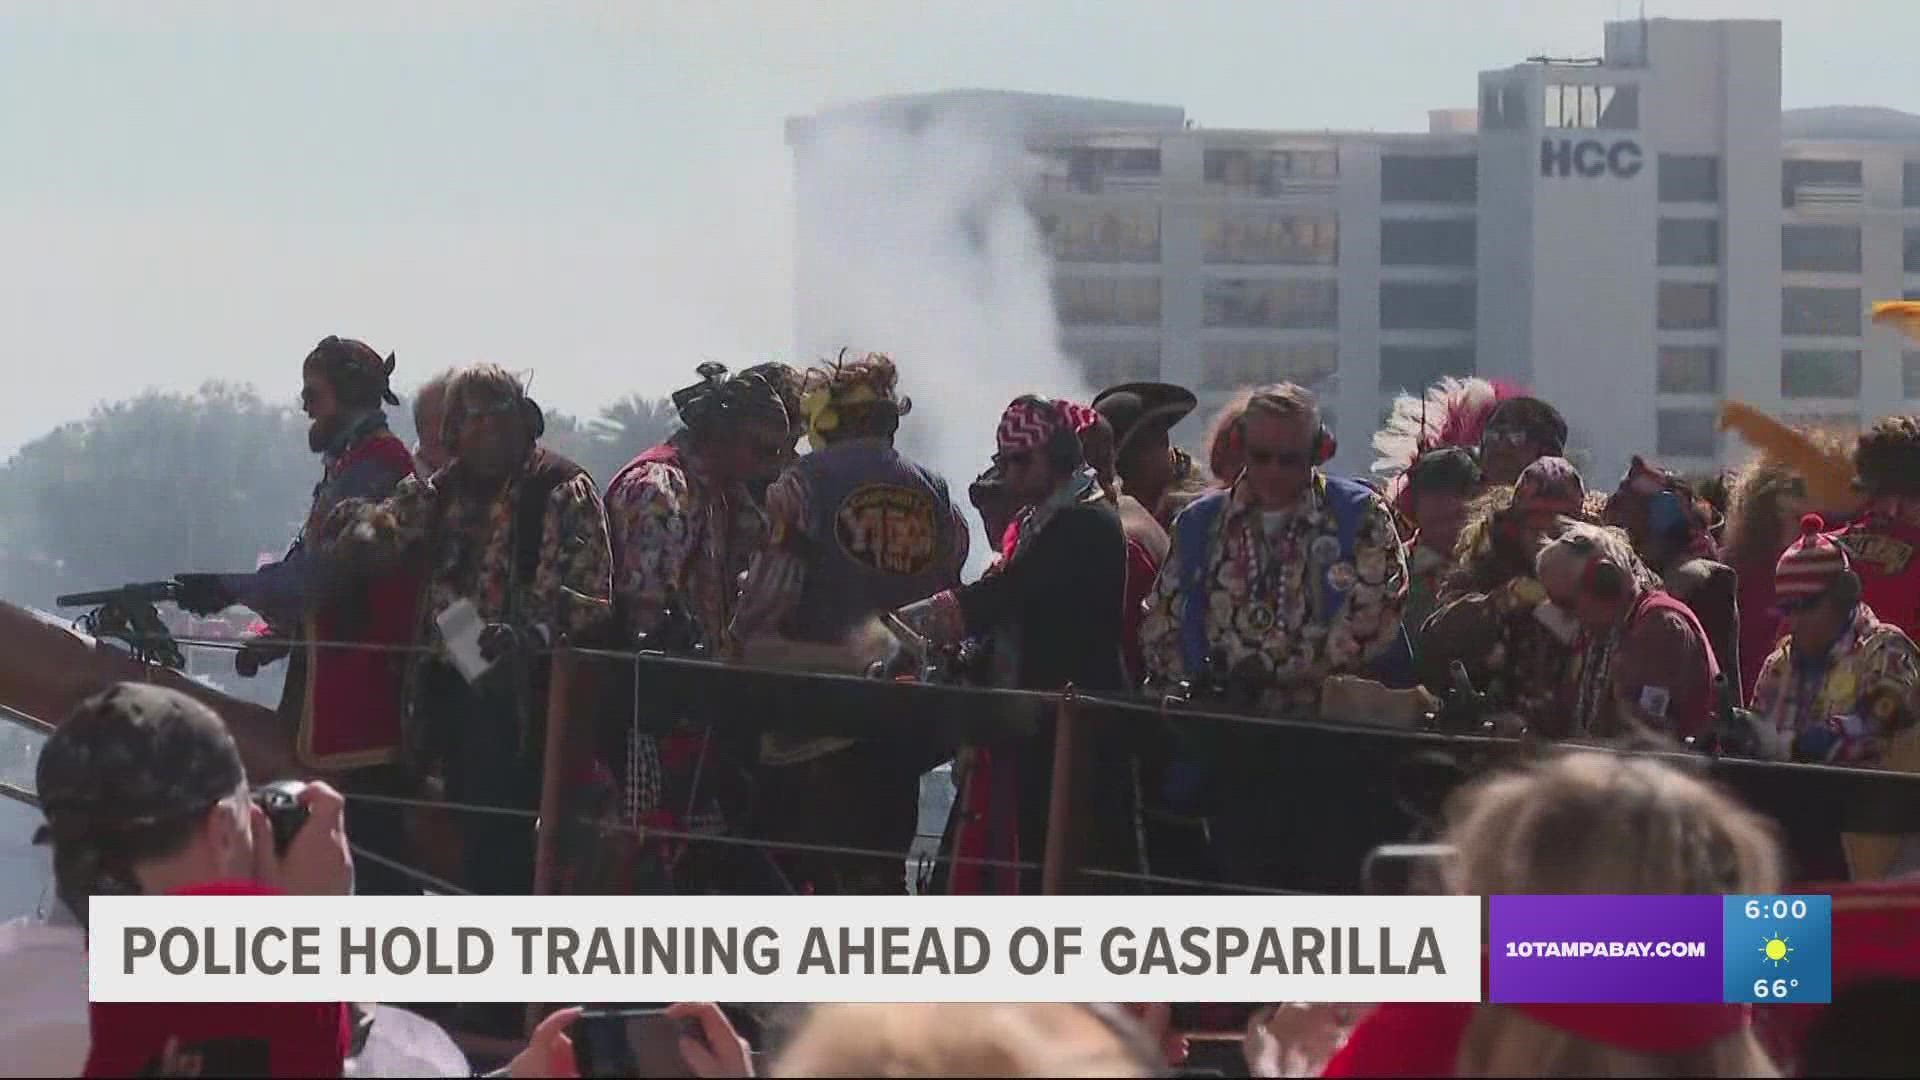 As hundreds of thousands of people prepare for our area’s biggest annual event, first responders are already working on ways to keep Gasparilla celebrations safe.